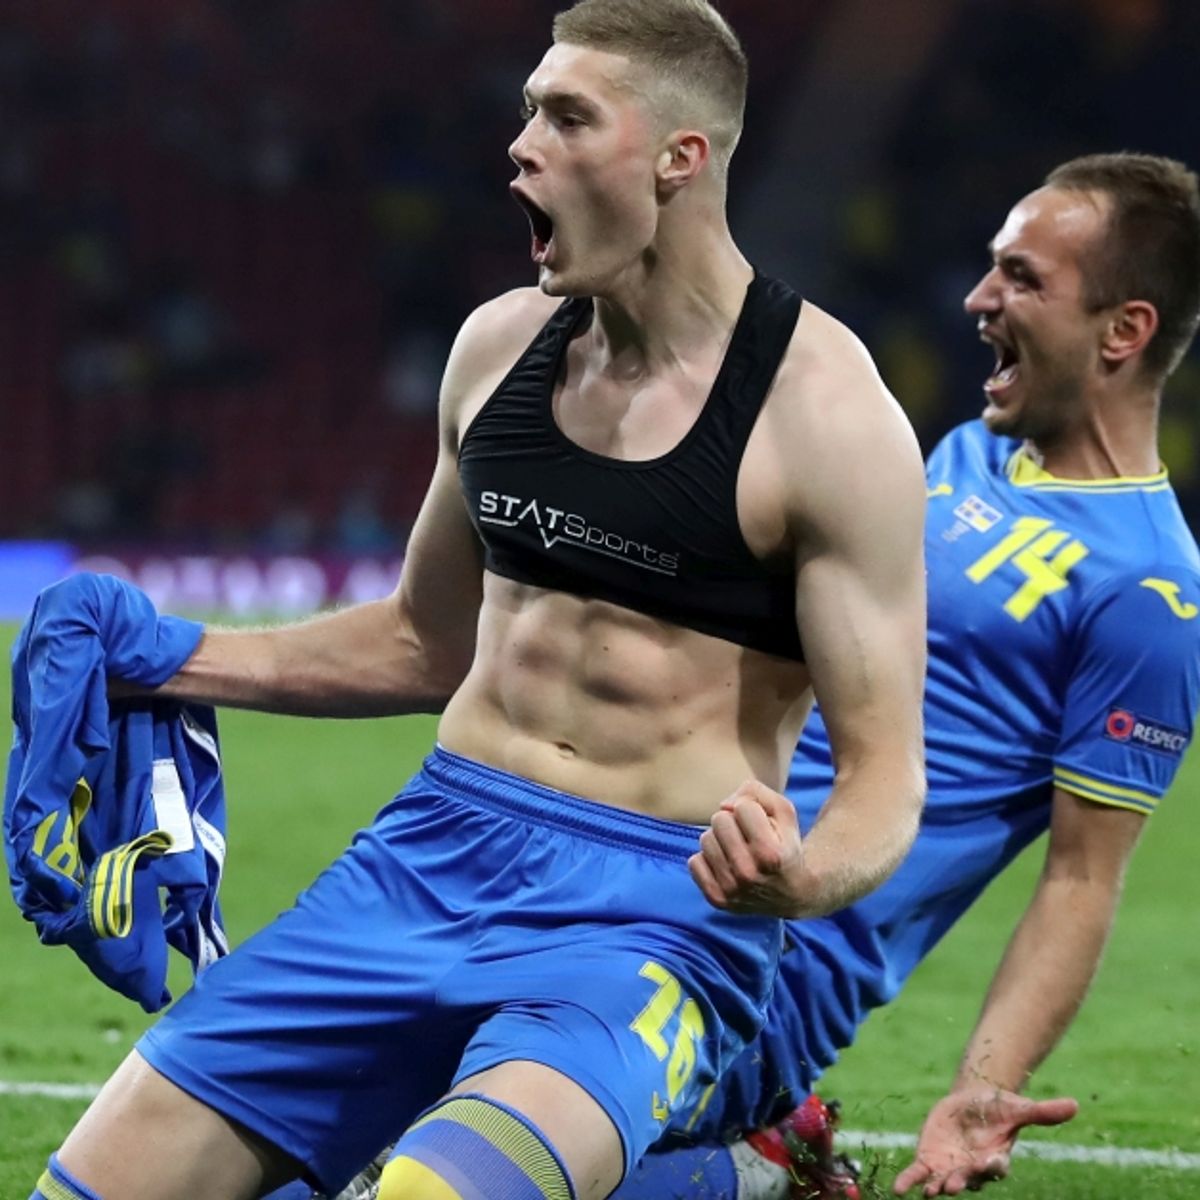 Did Men's Soccer Player Reveal Sports Bra After Game-Winning Goal?